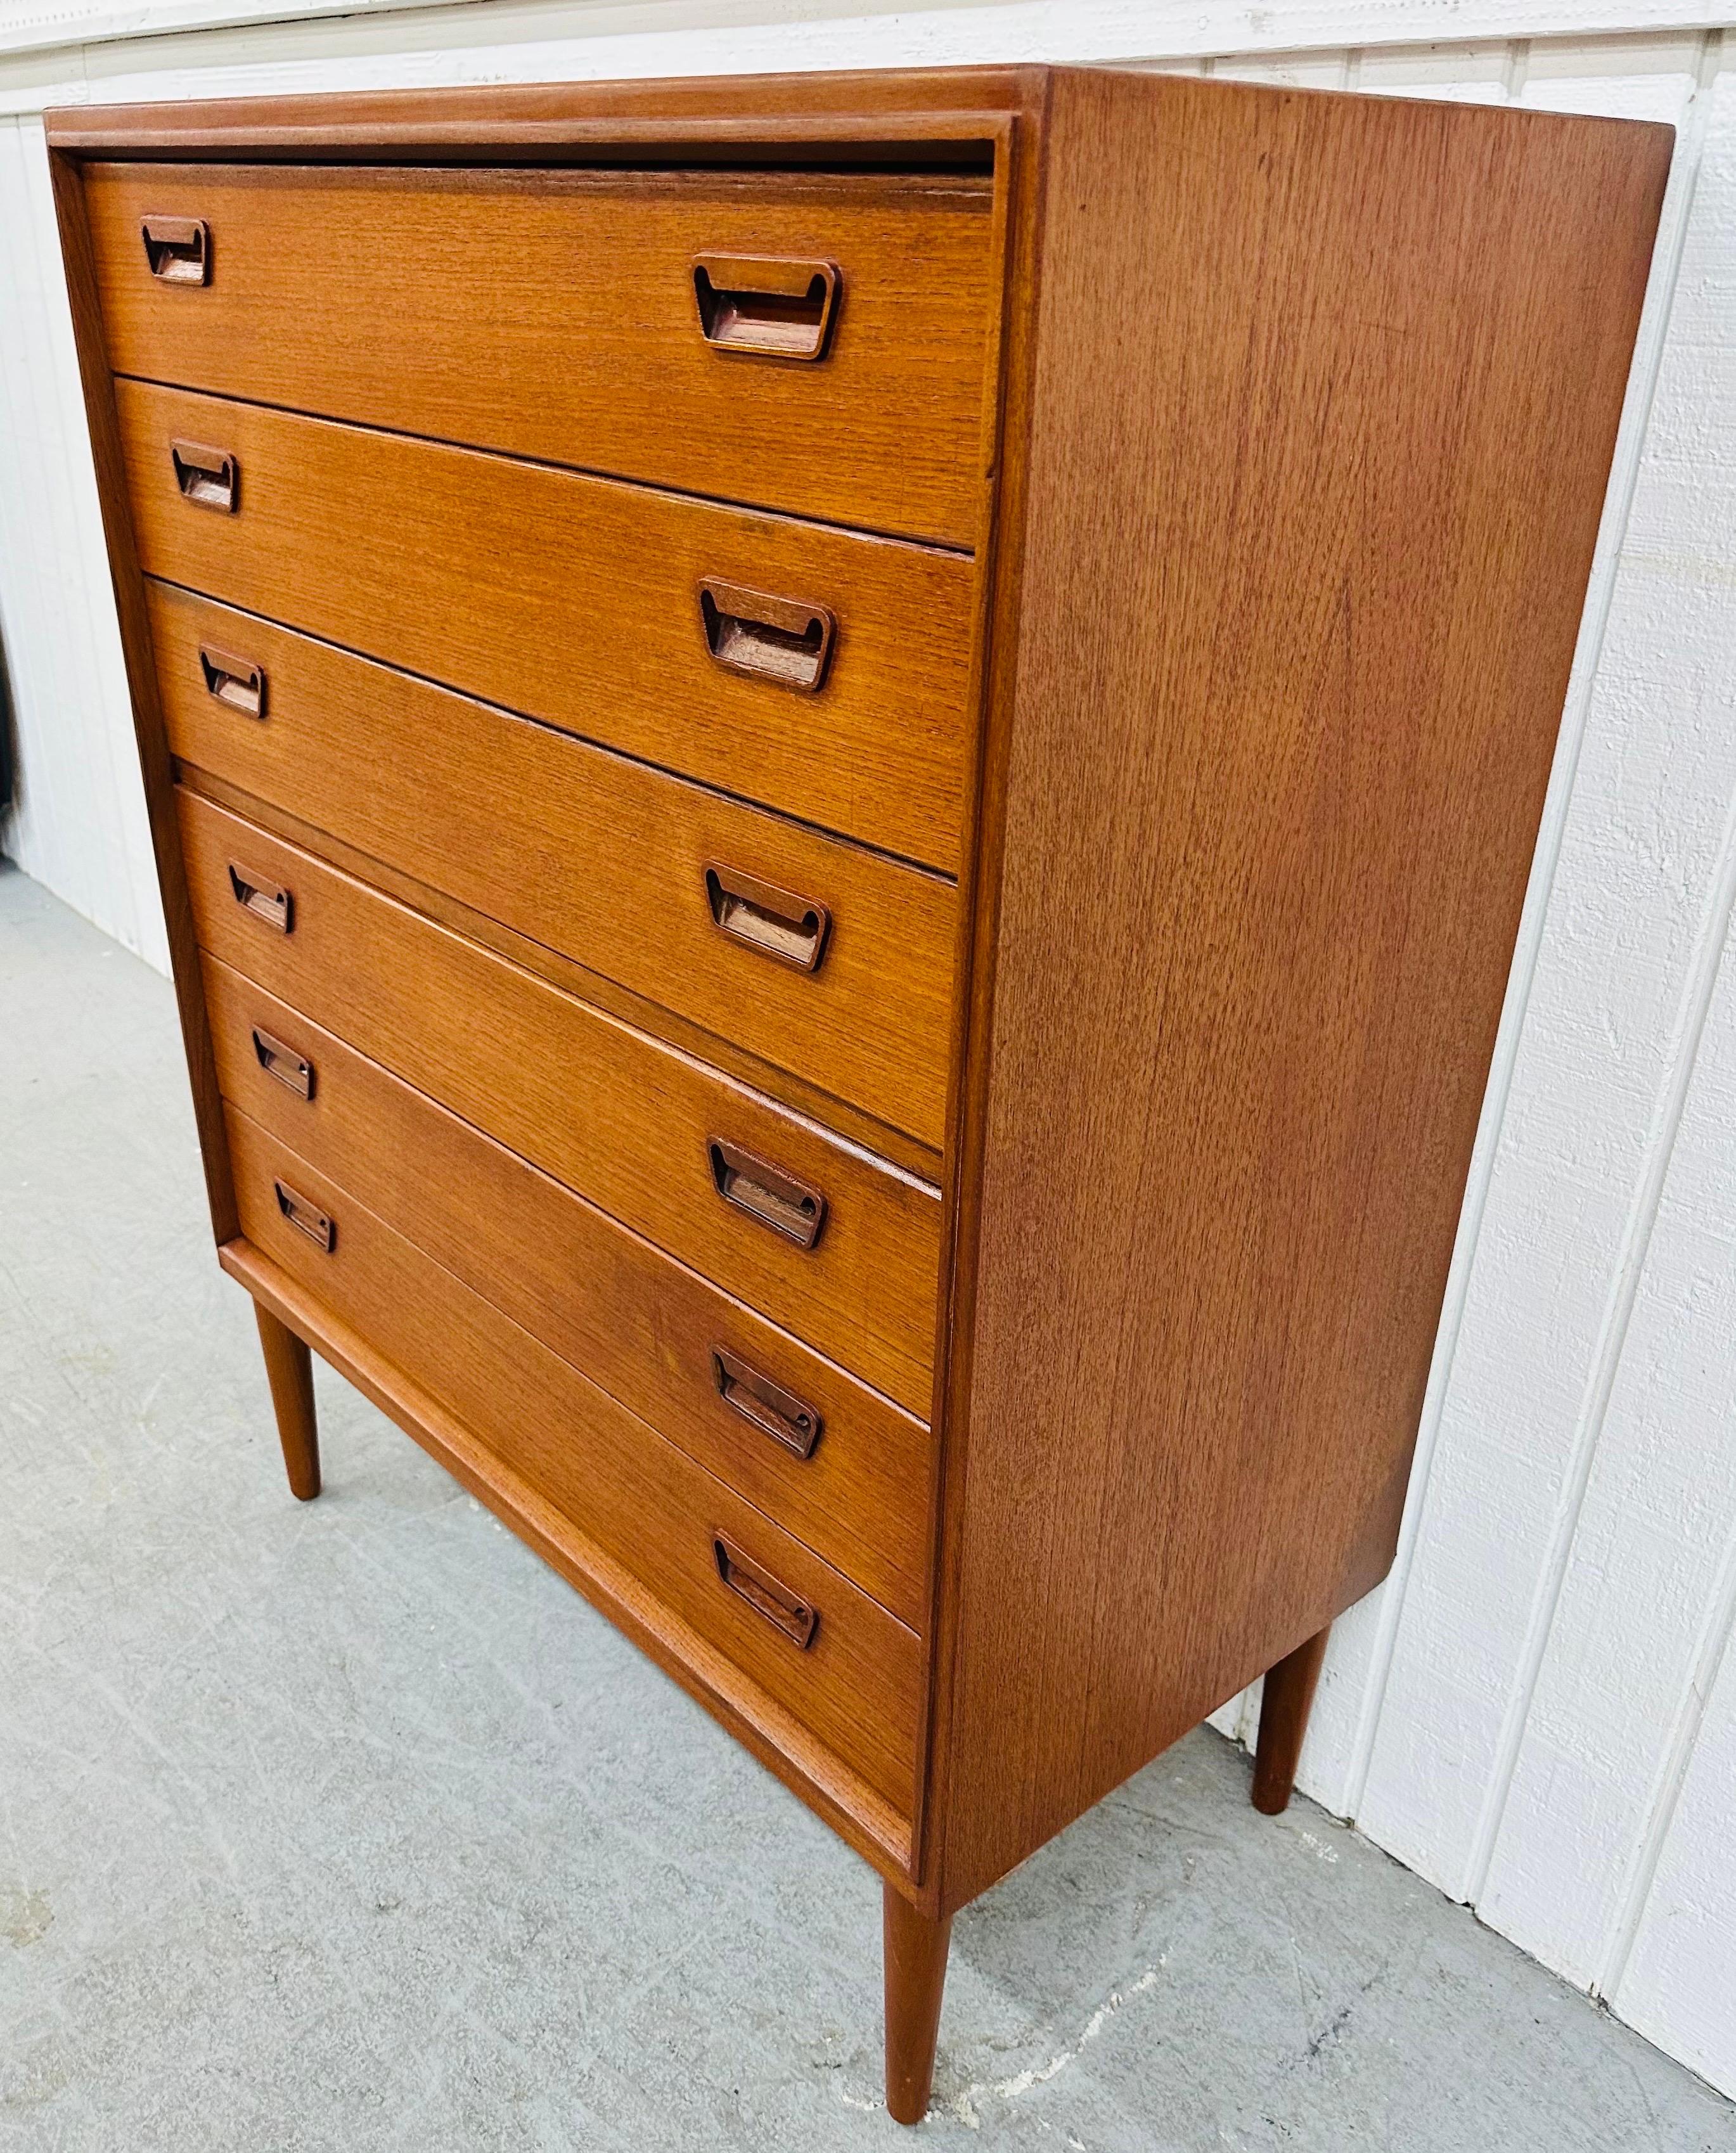 This listing is for a Mid-Century Danish Modern Teak High Chest. Featuring a straight line design, six drawers for storage, wooden pulls, and a beautiful teak finish. This is an exceptional combination of quality and design from Denmark!